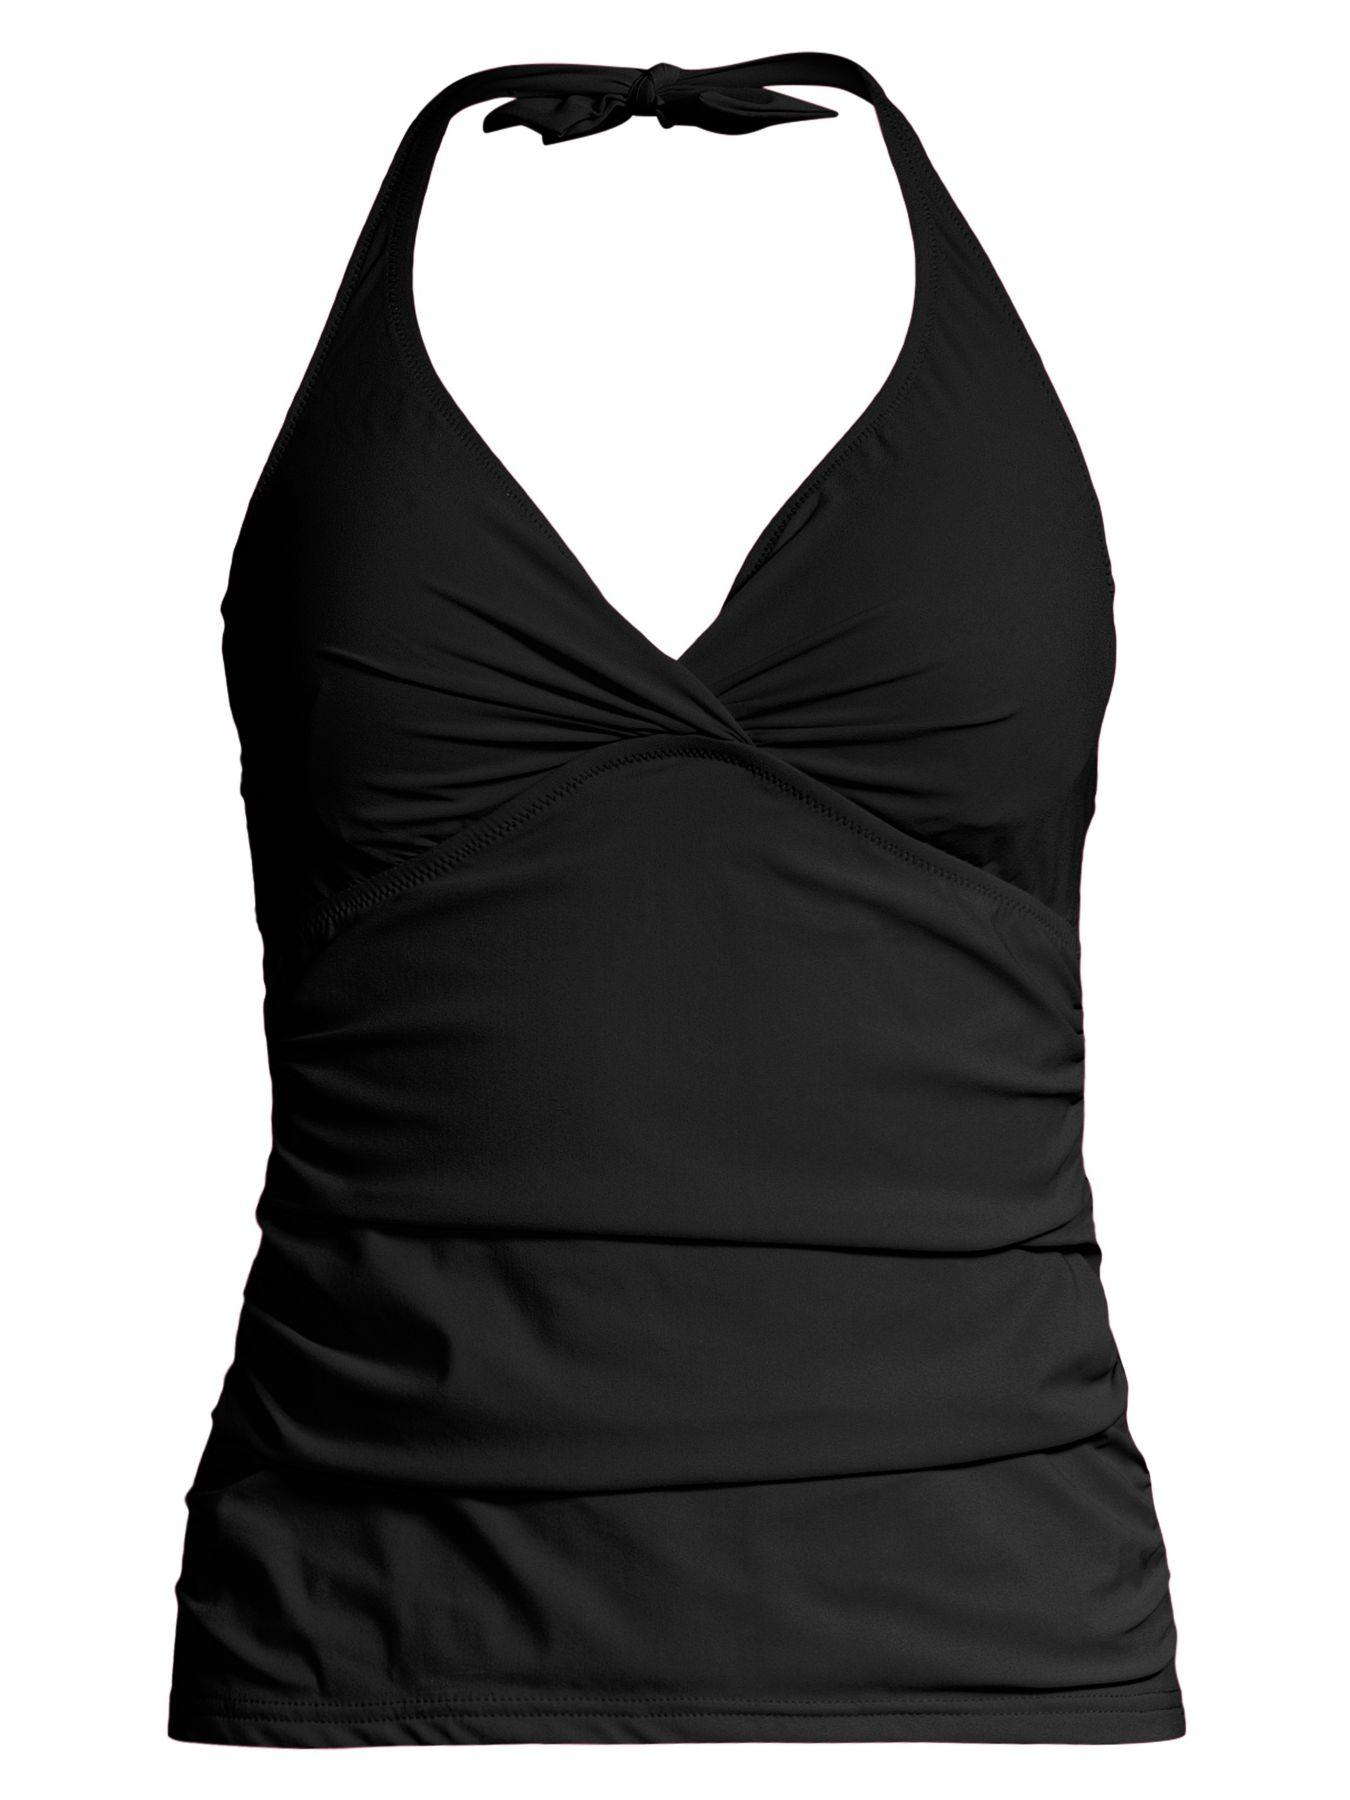 Gottex Ruched Halter Tankini Top in Black - Lyst